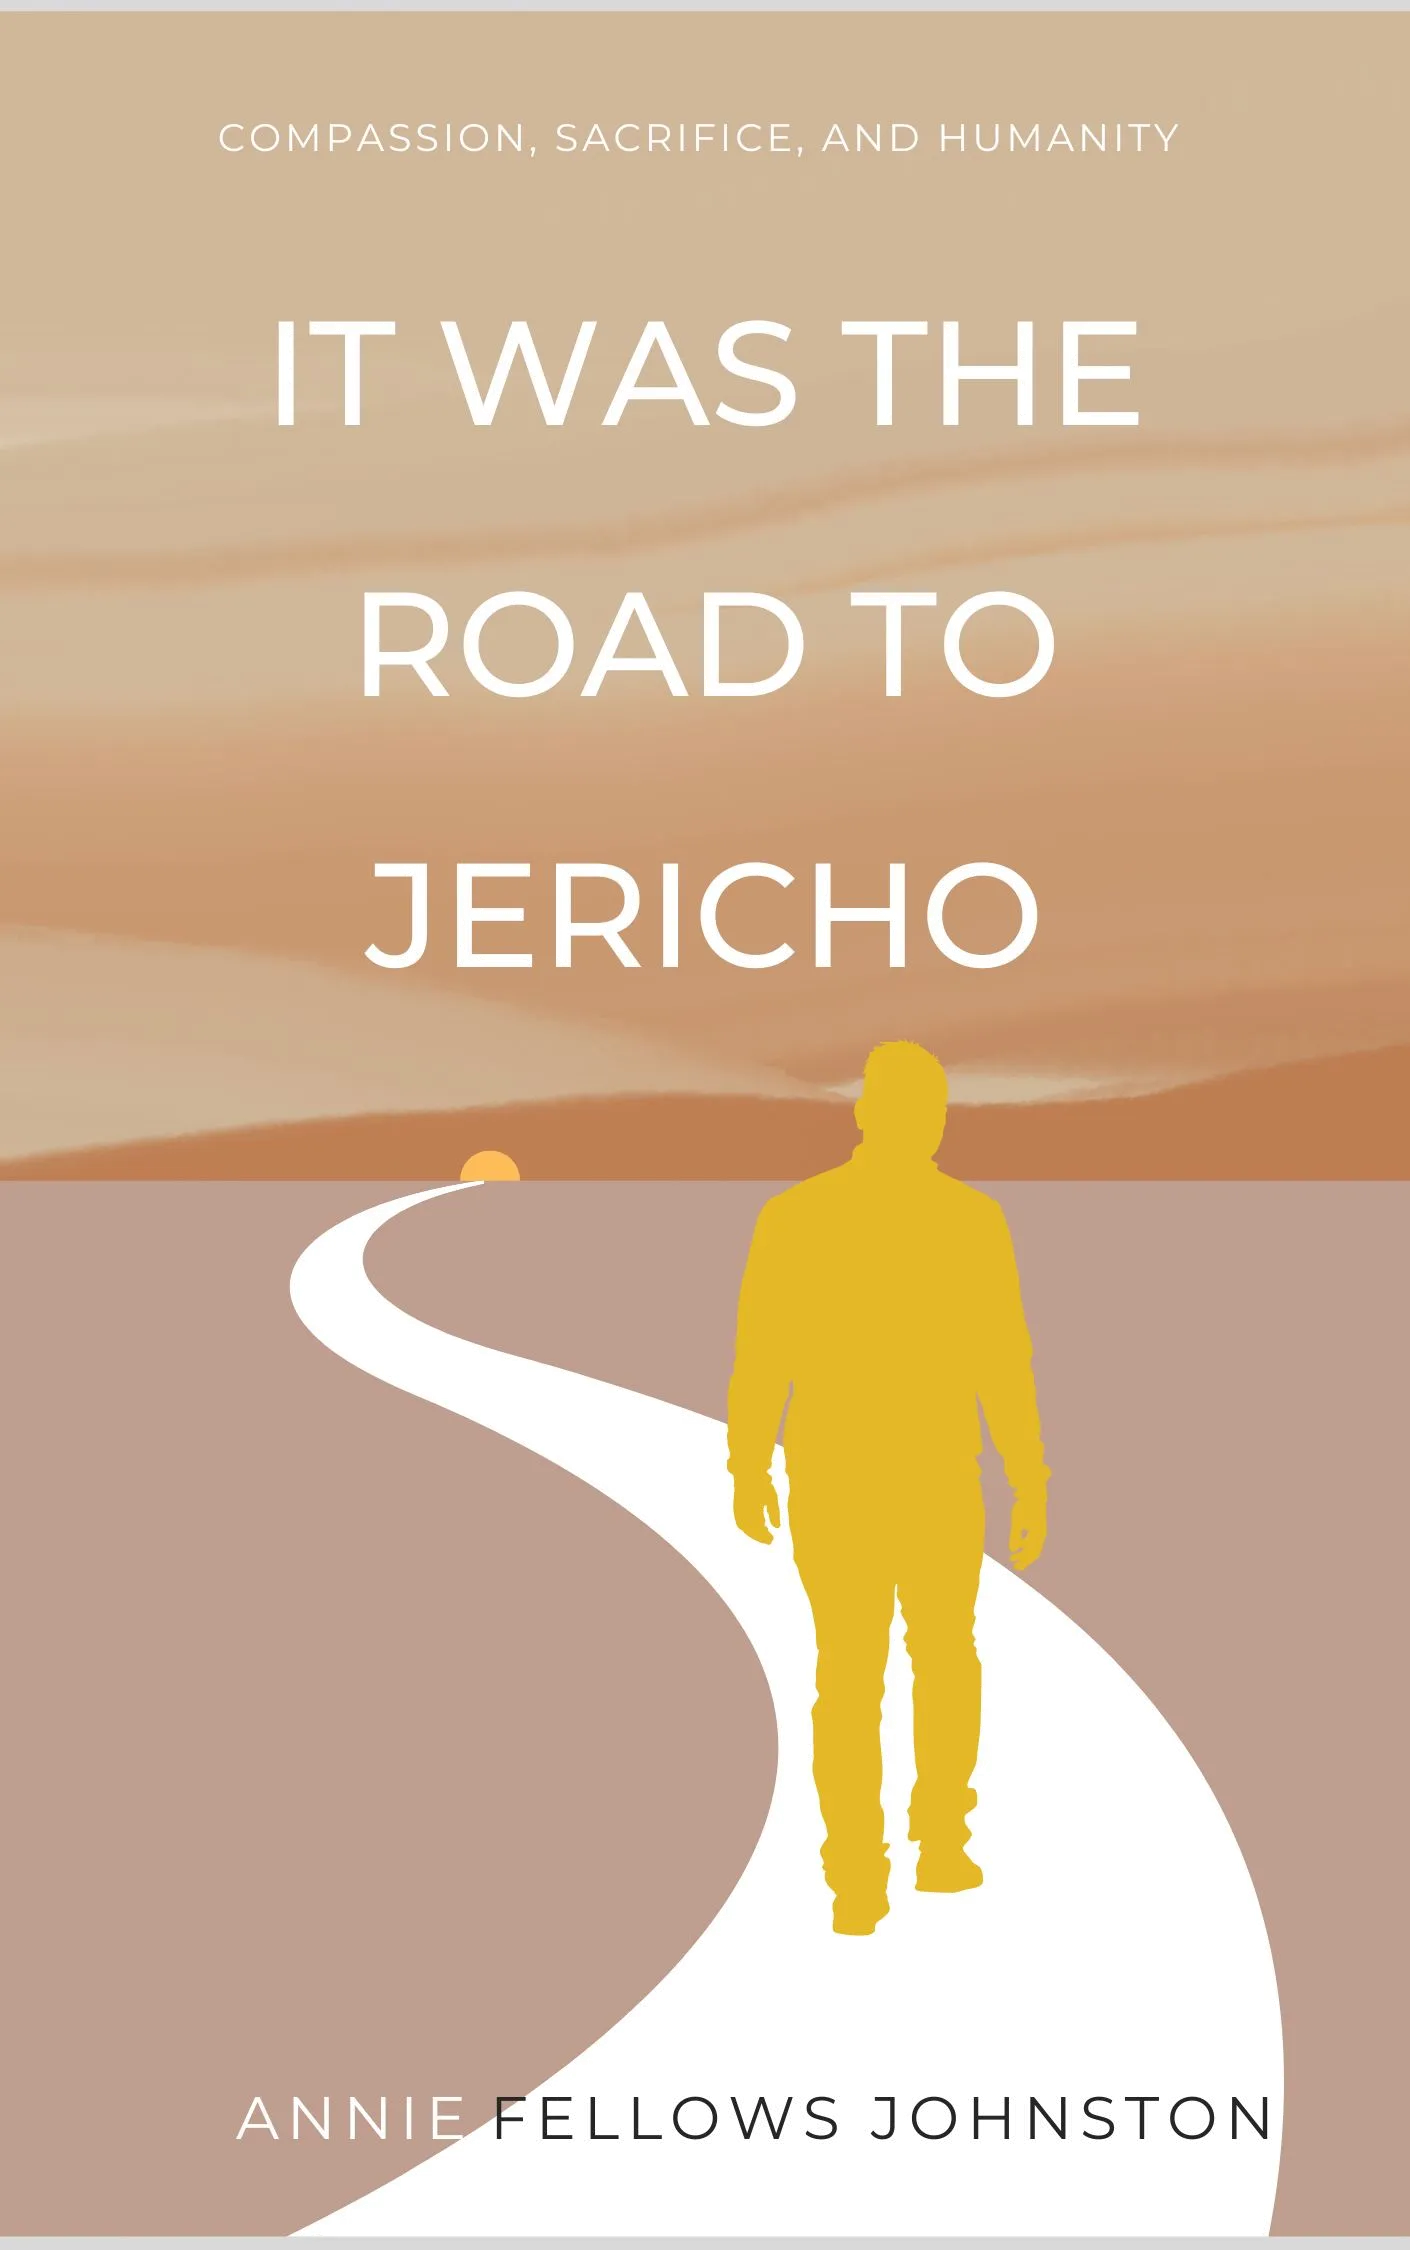 It Was the Road to Jericho Audiobook by Annie Fellows Johnston